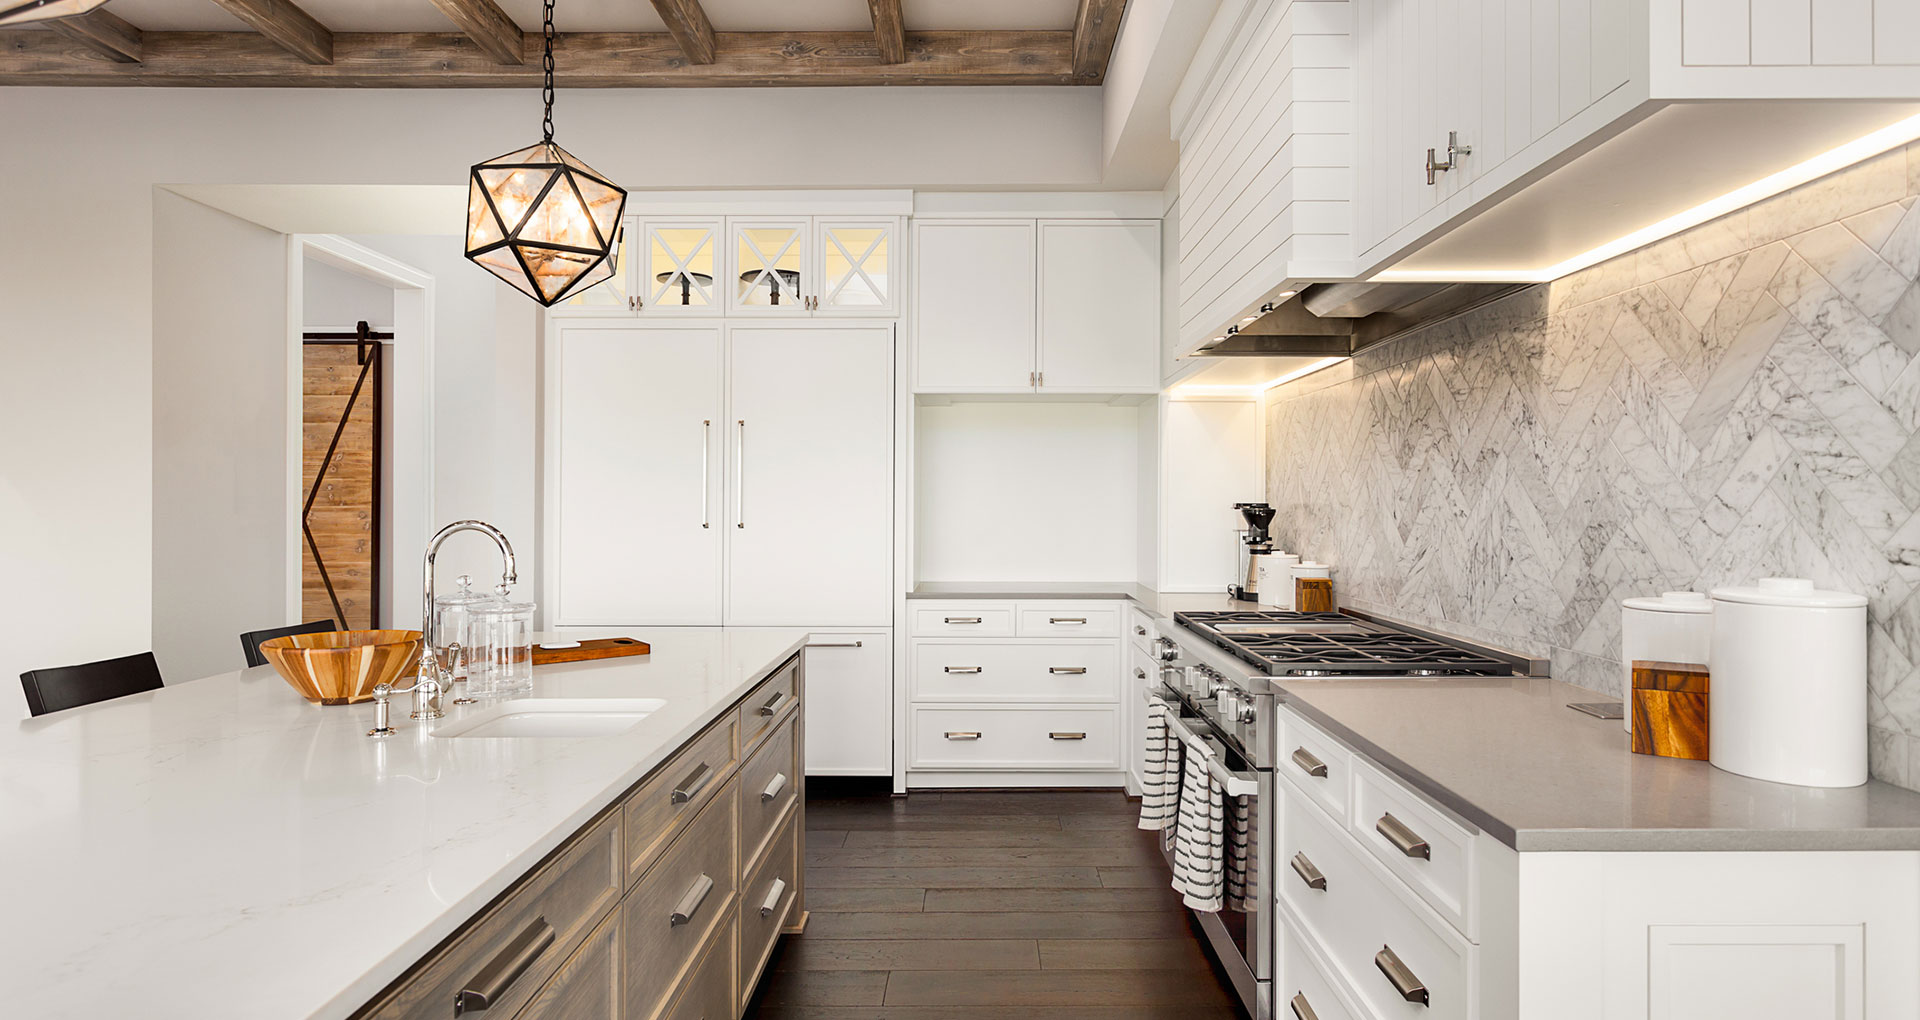 A clean and functional kitchen is vital to make your house perfect, Lifestyle Decor